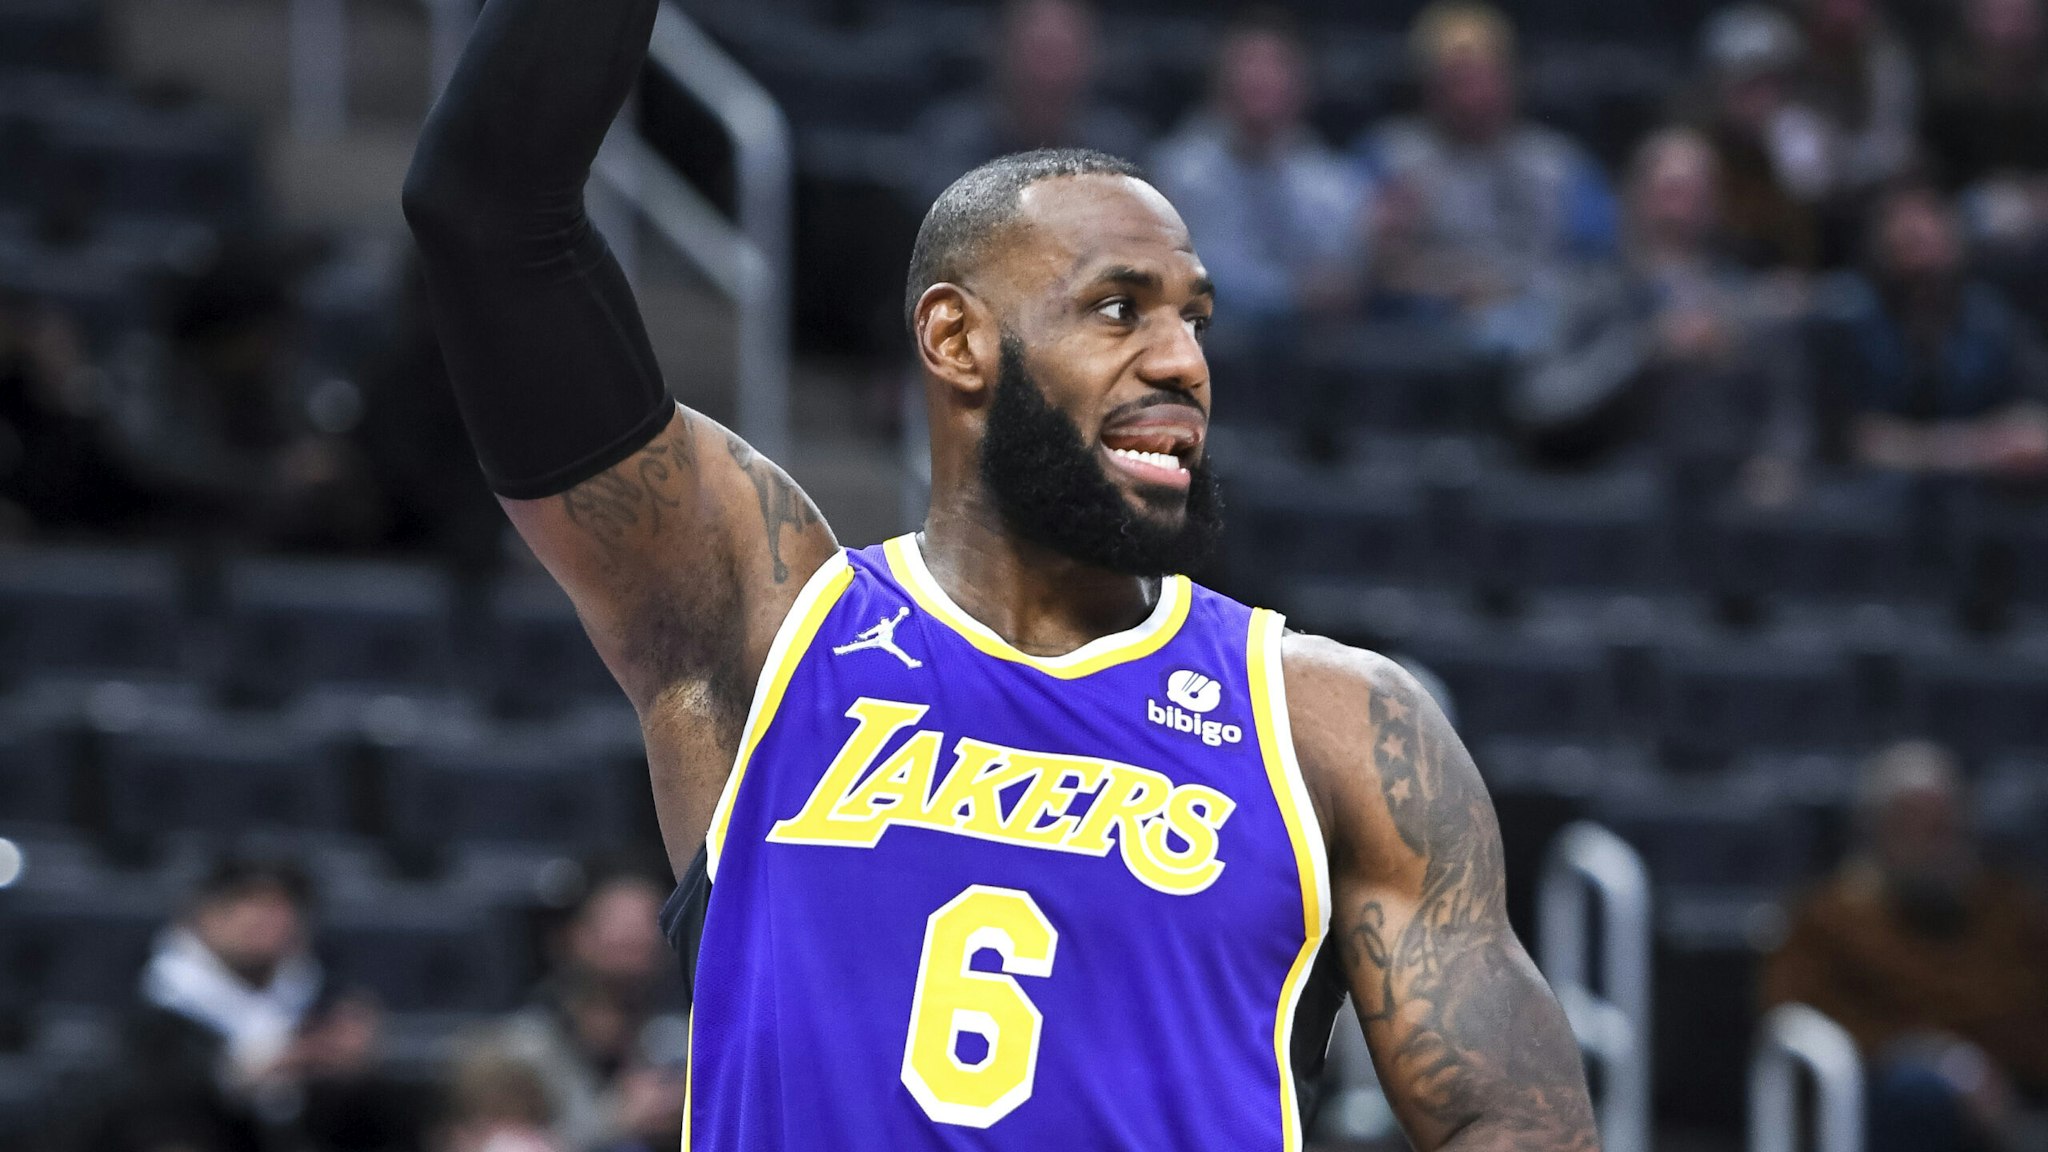 DETROIT, MICHIGAN - NOVEMBER 21: LeBron James #6 of the Los Angeles Lakers signals against the Detroit Pistons during the first quarter of the game at Little Caesars Arena on November 21, 2021 in Detroit, Michigan. NOTE TO USER: User expressly acknowledges and agrees that, by downloading and or using this photograph, User is consenting to the terms and conditions of the Getty Images License Agreement.